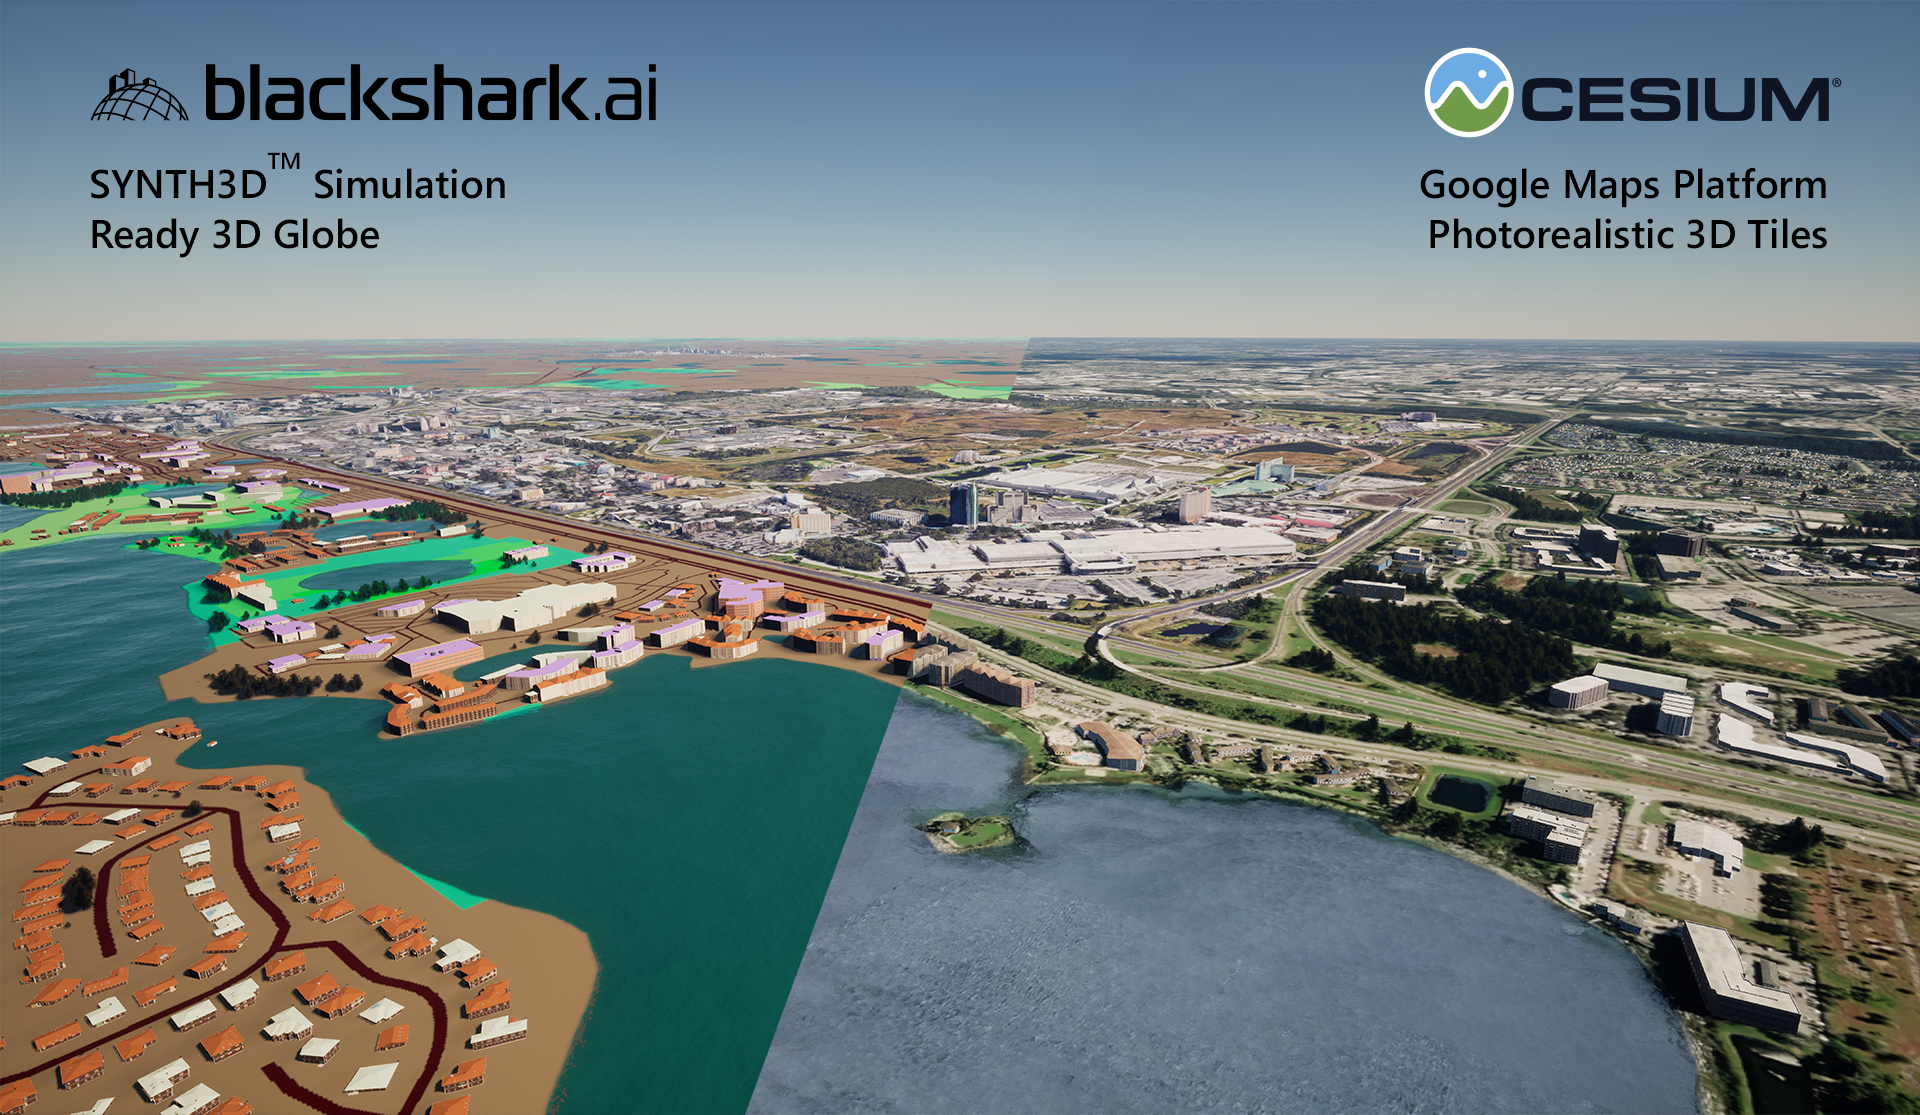 Blackshark.ai Enhances Geospatial Modeling with SYNTH3D Support for 3D Tiles OGC Community Standard Created by Cesium